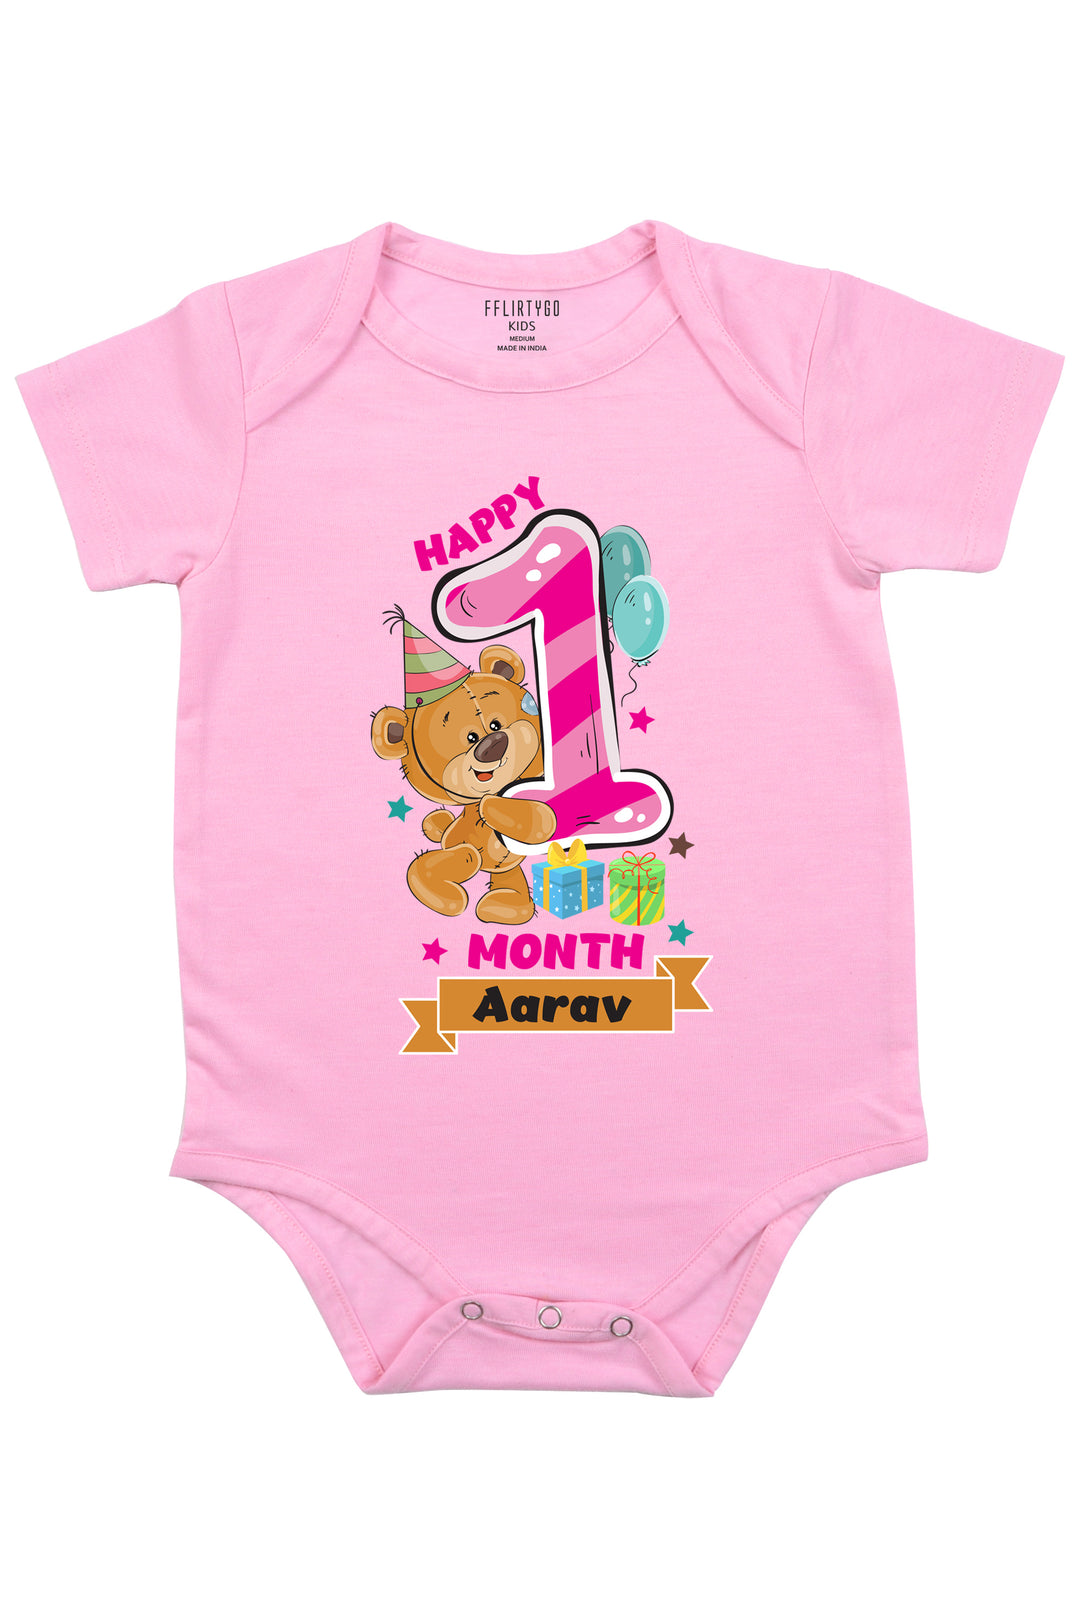 Discover onesies, baby rompers, and infant designs at Fflirtygo. Explore newborn onesies and adorable pink color options, including the charming bear onesie. Dress your little one in delightful style!